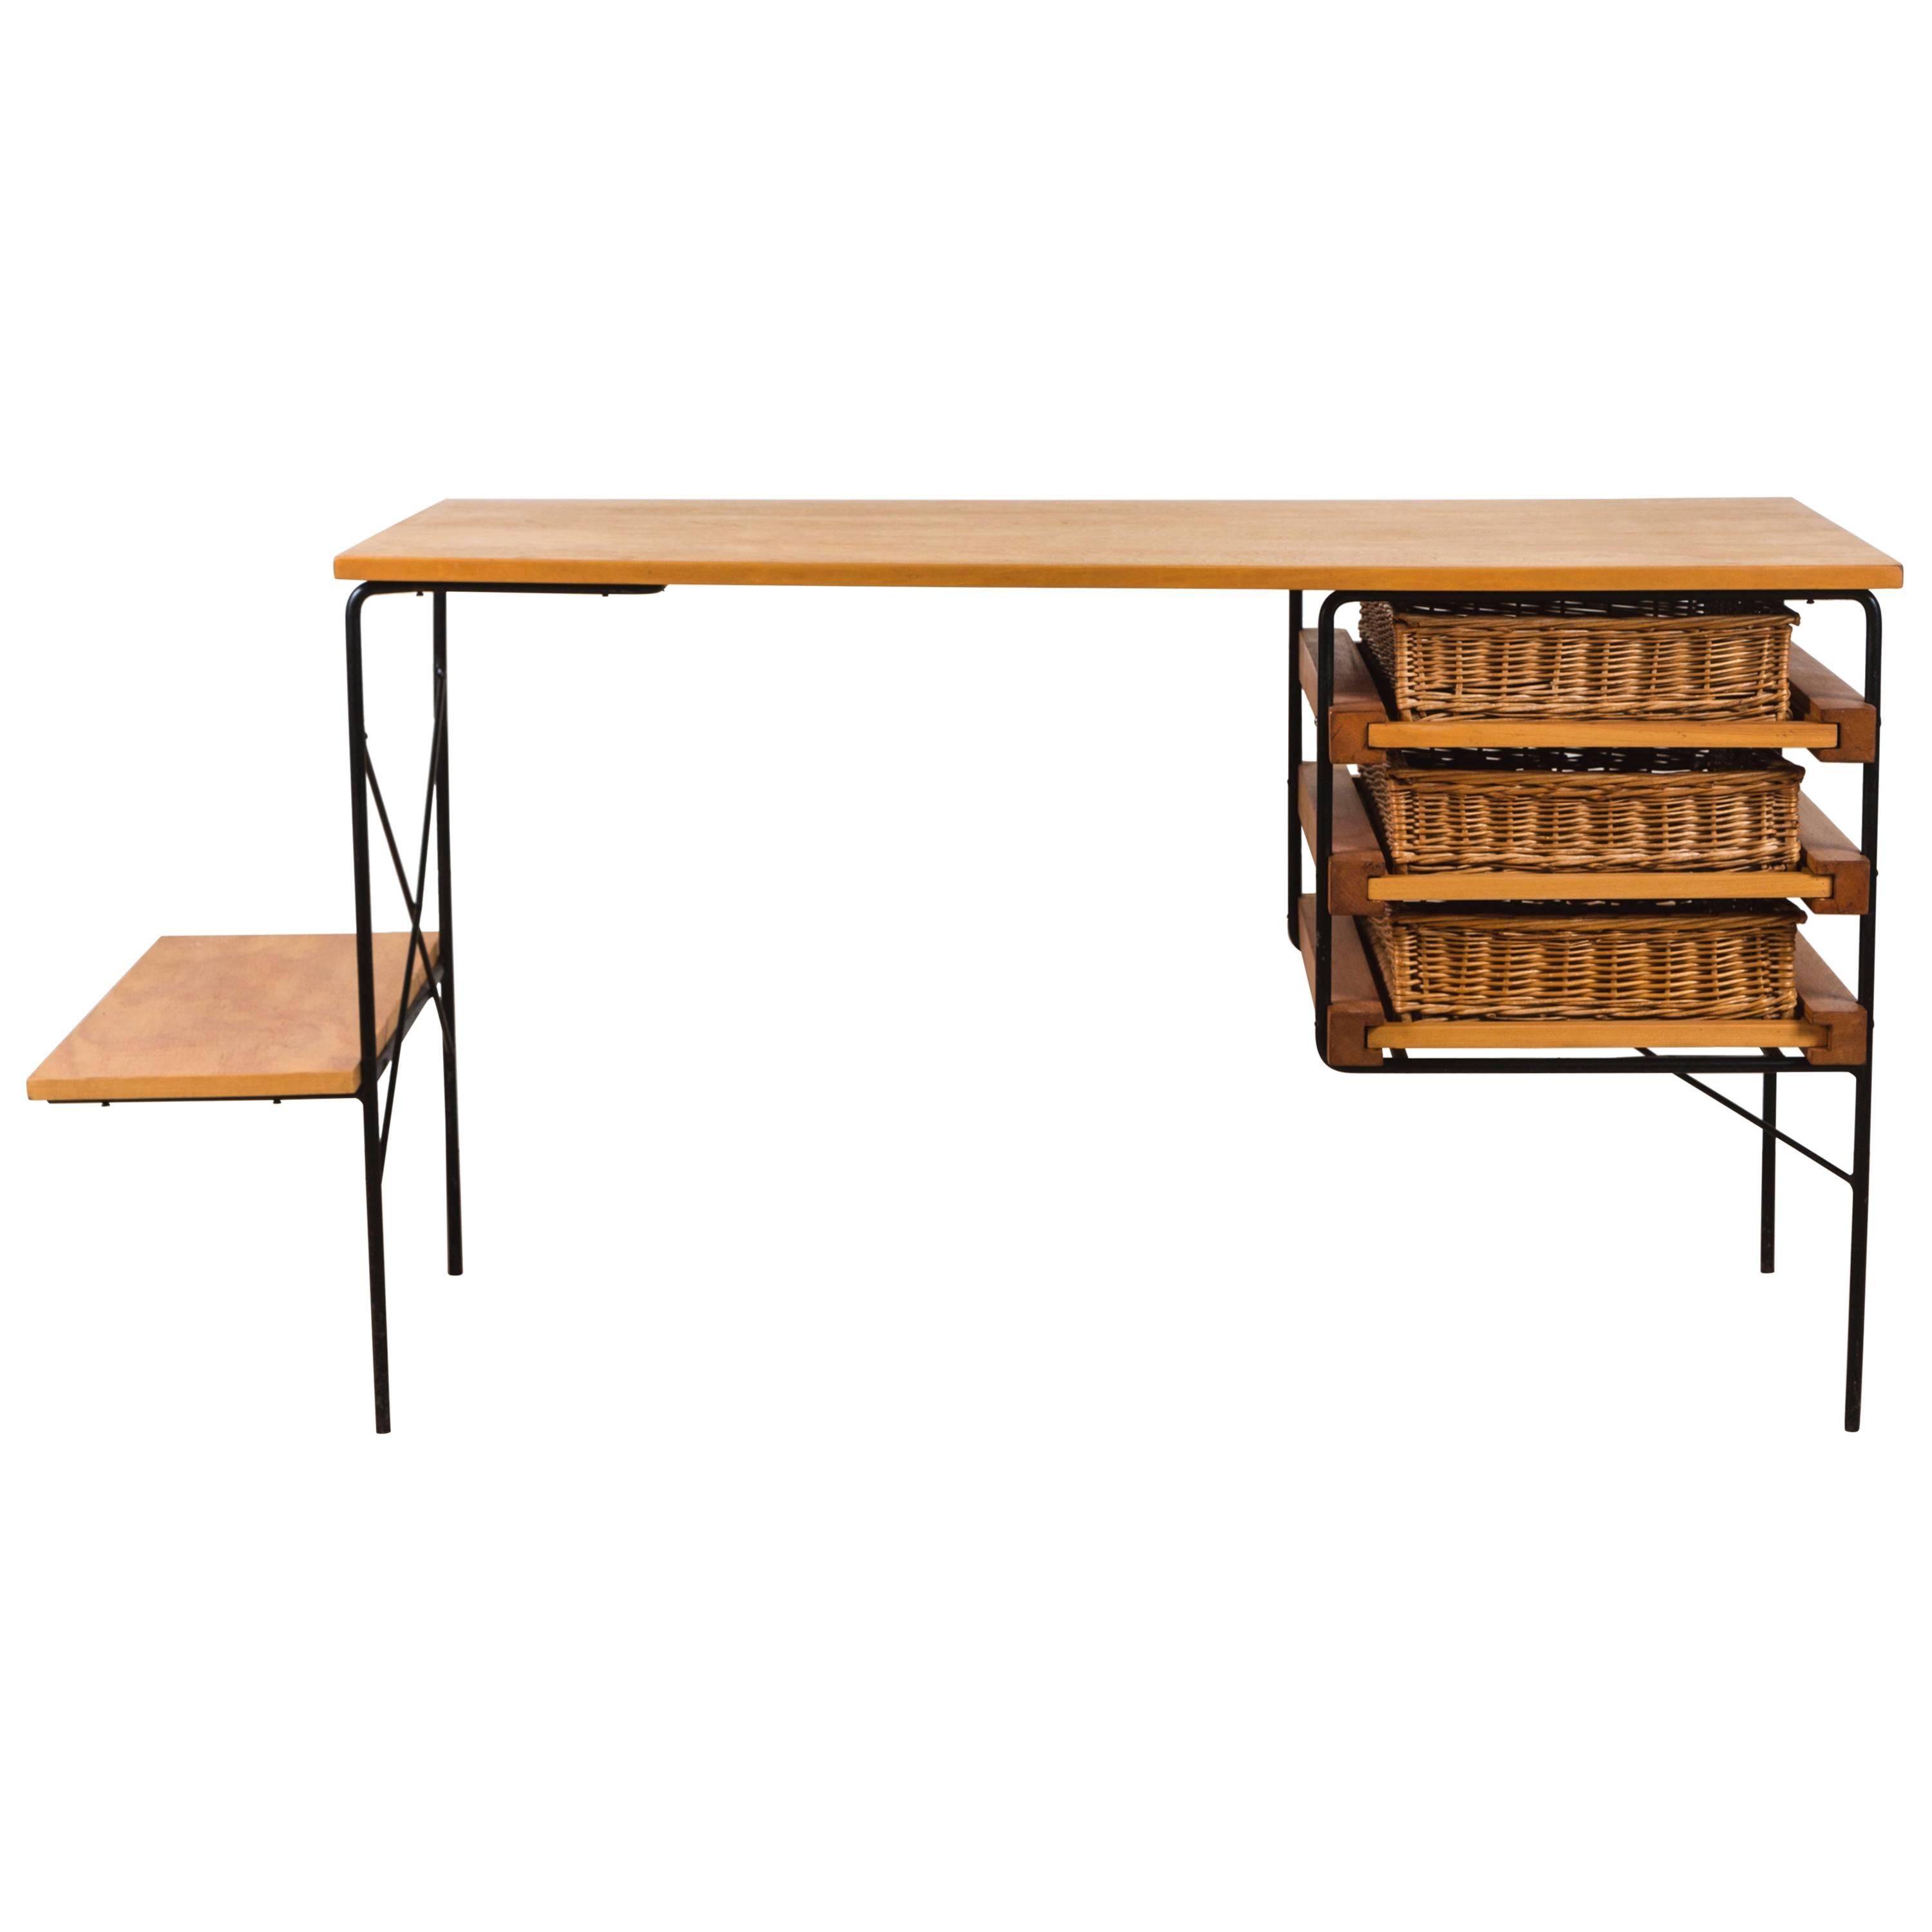 Iron and Maple Desk by Dorothy Schindele for Modern Color CA